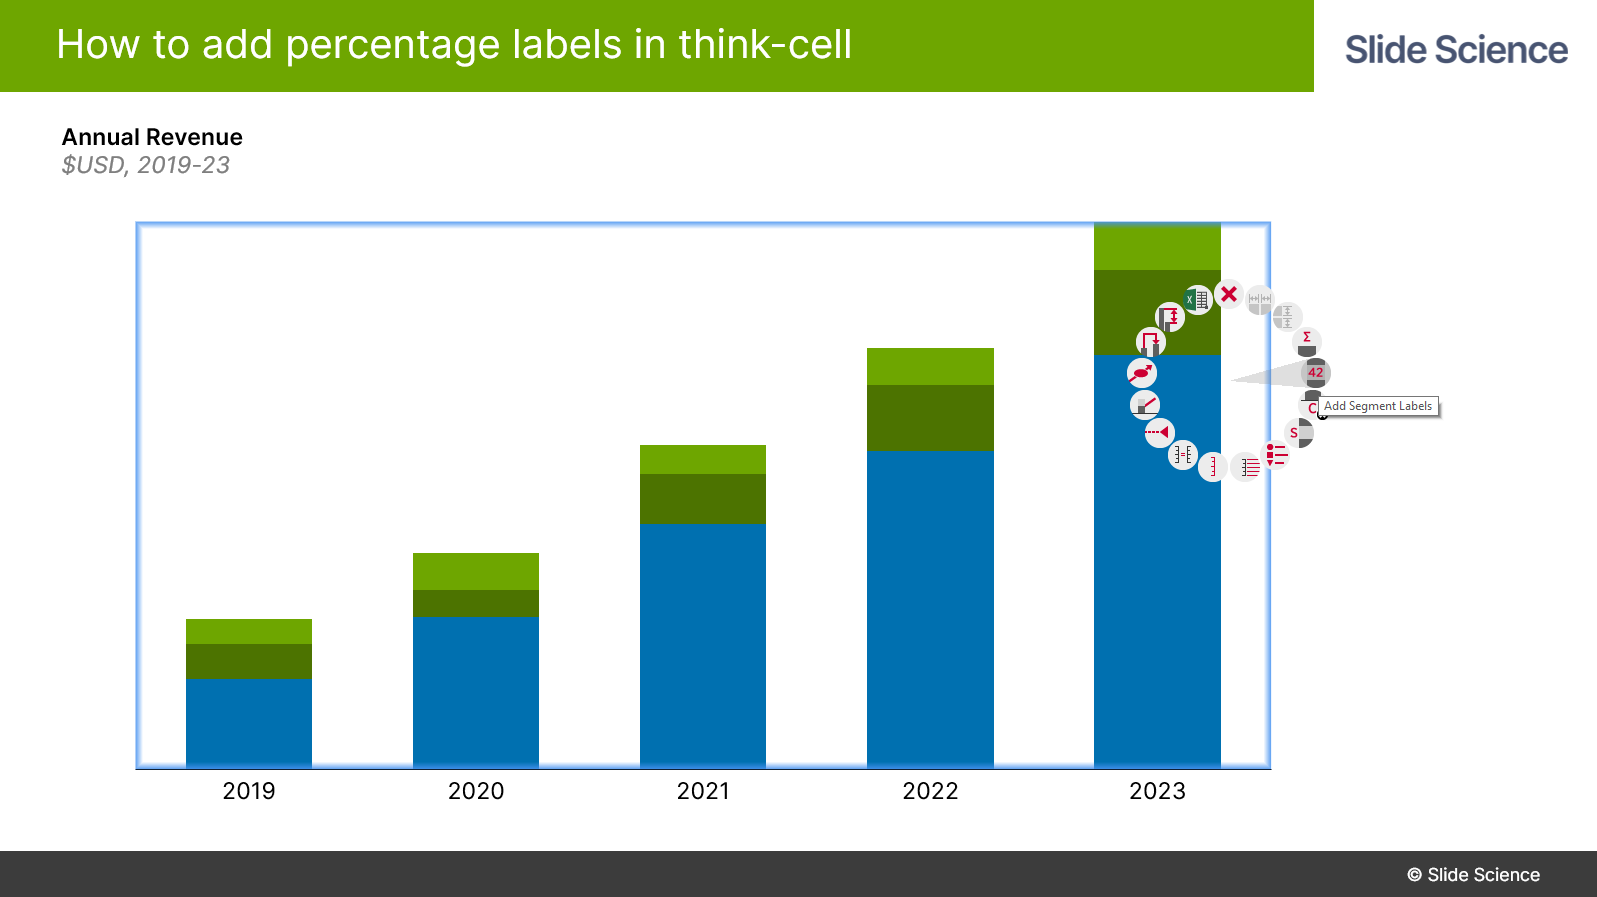 Add percentage labels in think-cell - Step 1: Add chart labels